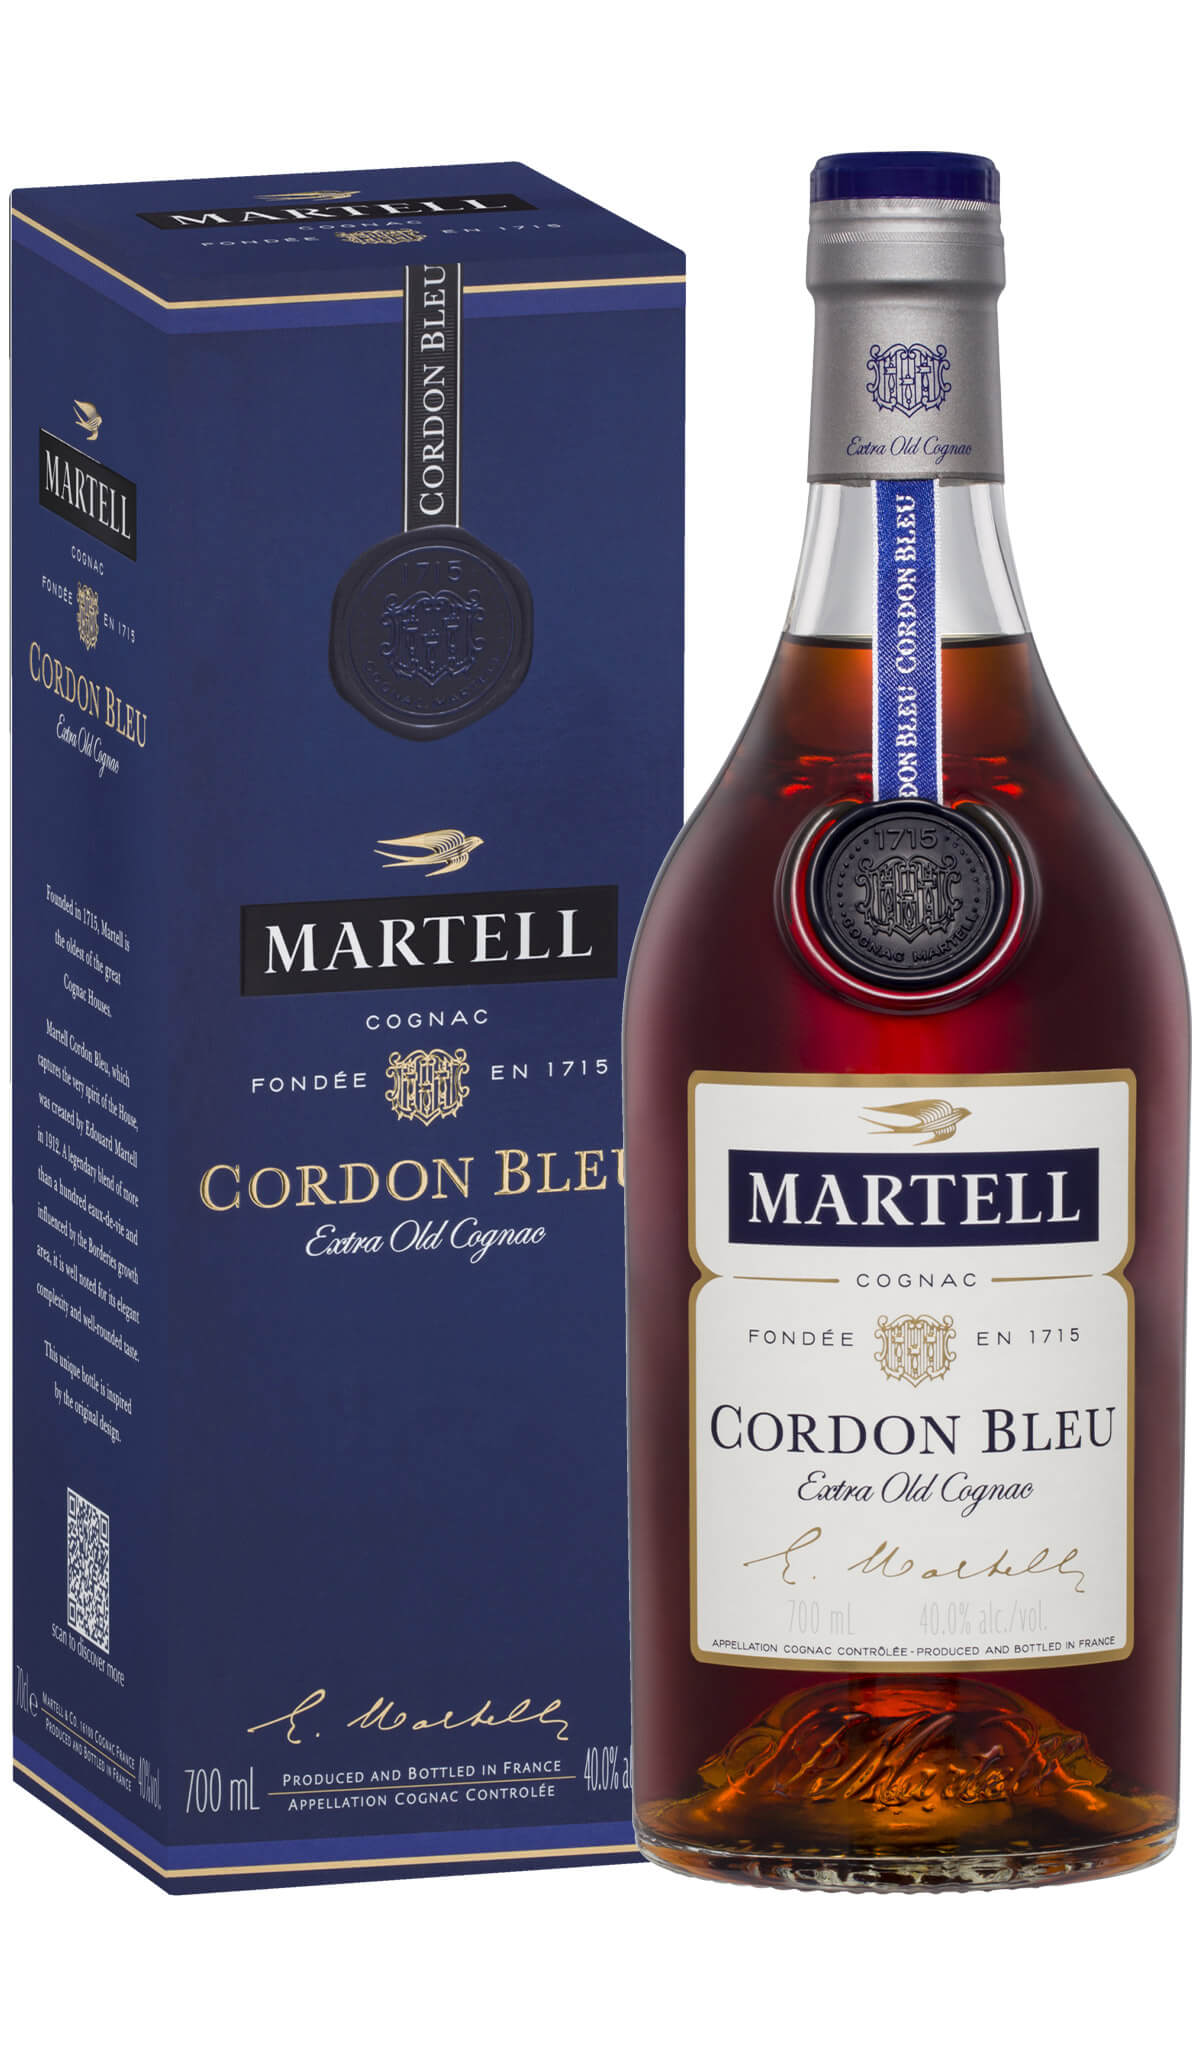 Find out more or buy Martell Cordon Bleu Cognac 700mL (France) available online at Wine Sellers Direct - Australia's independent liquor specialists.